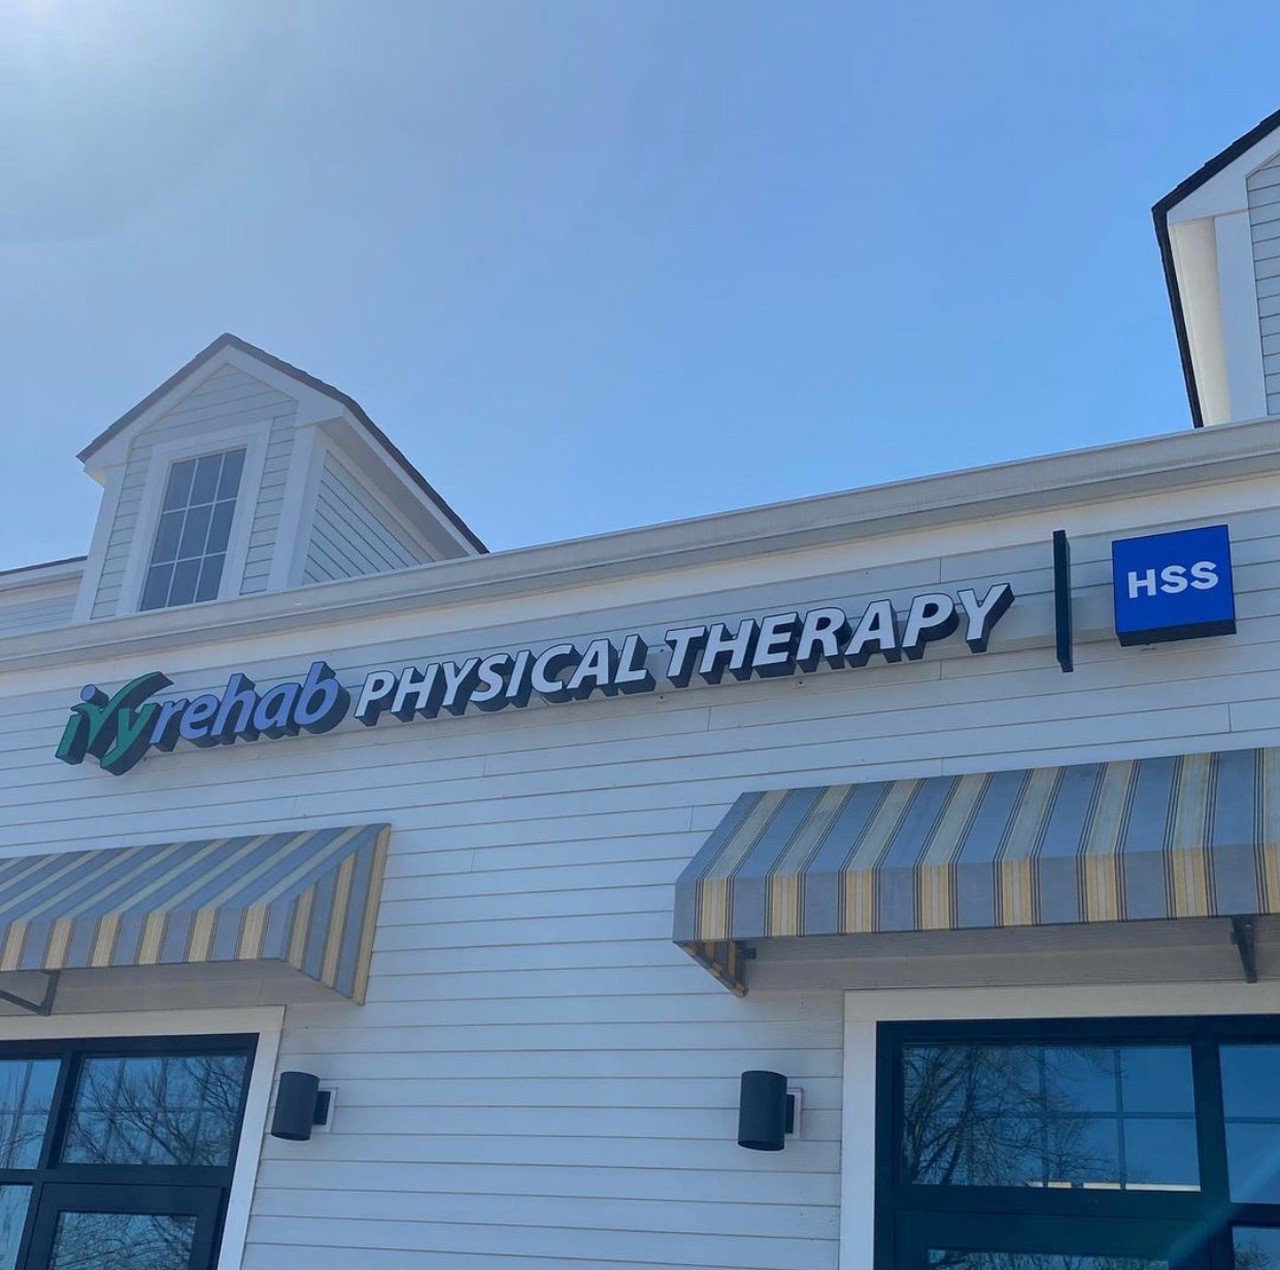 Ivy Rehab Physical Therapy in Glastonbury CT.9